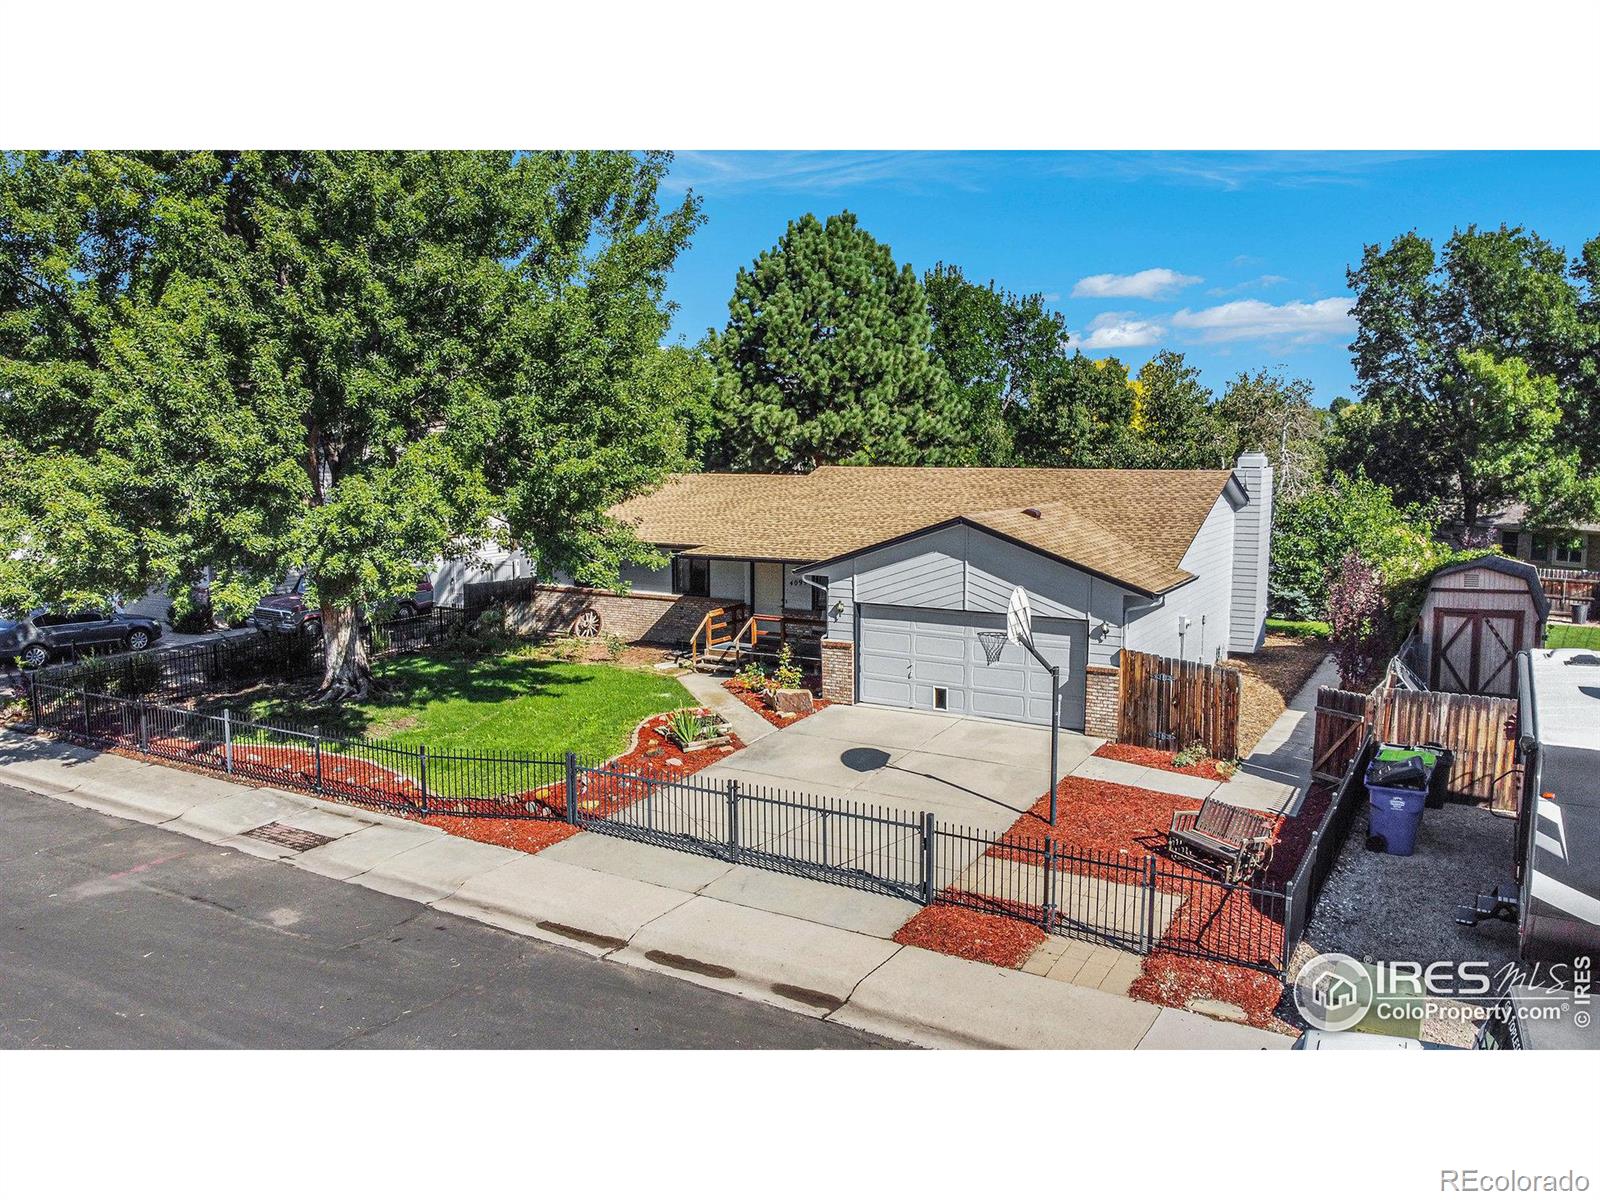 4099 w 16th st rd, greeley sold home. Closed on 2023-12-14 for $437,500.